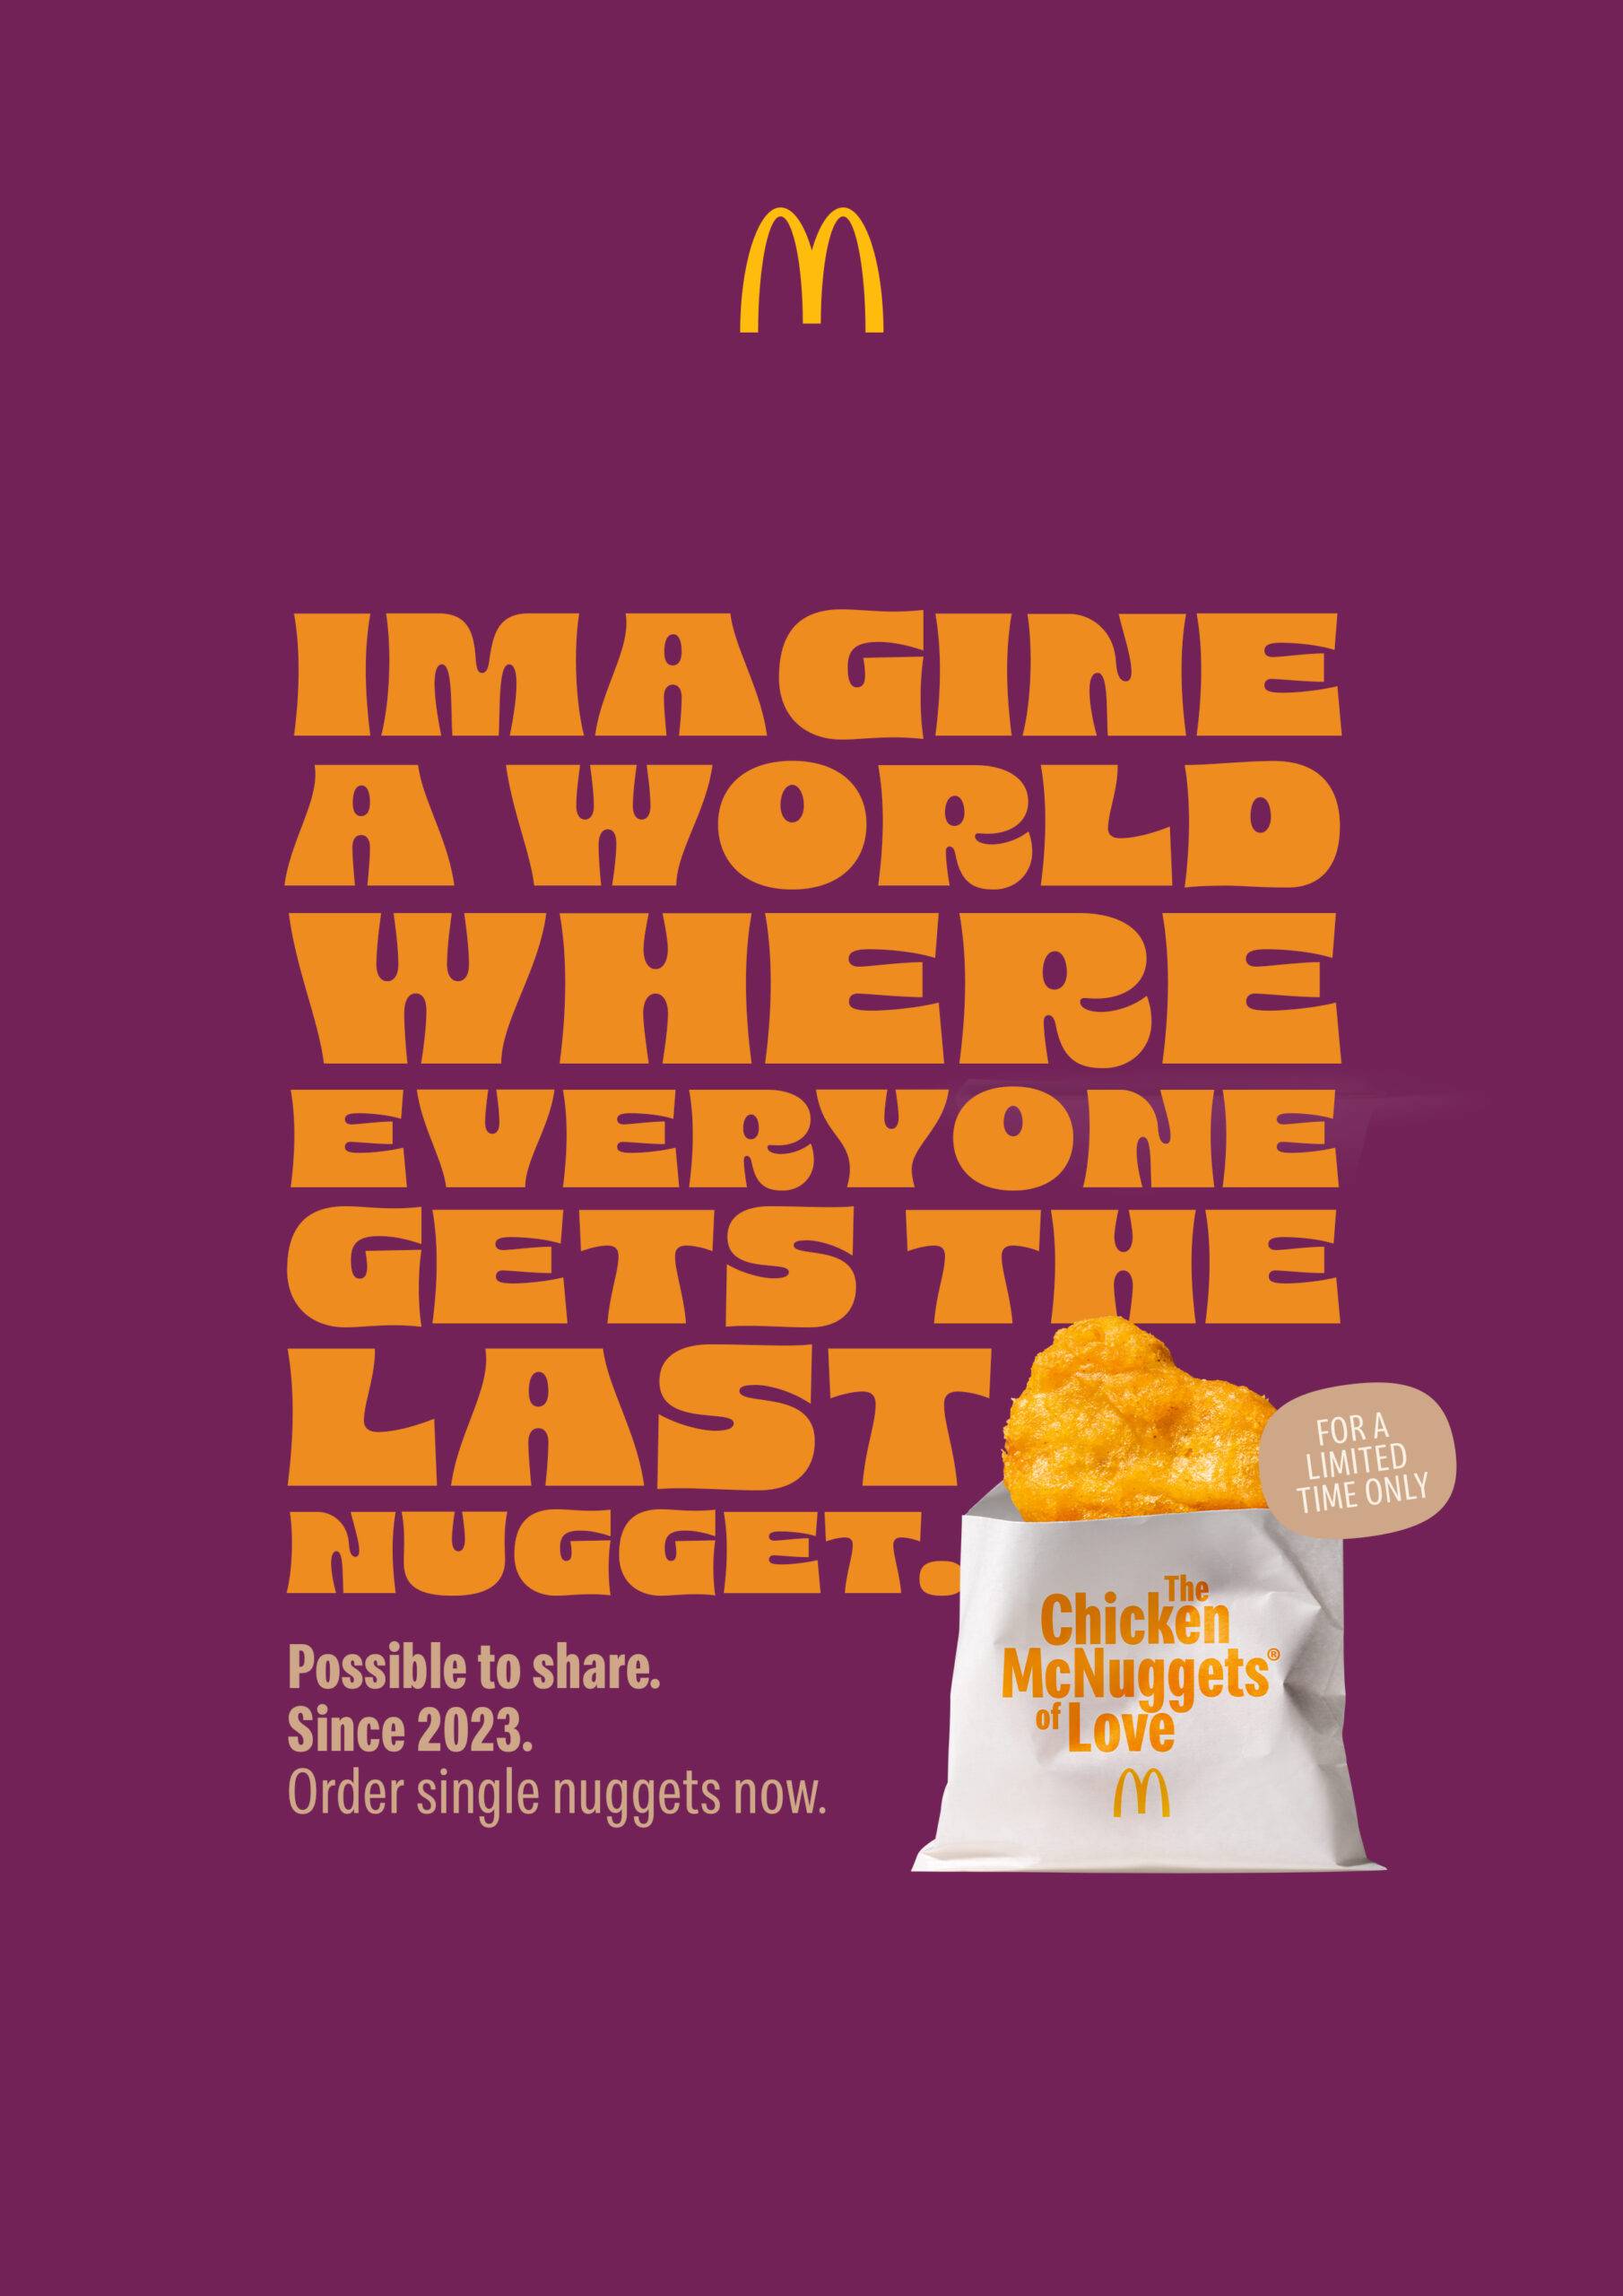 A poster promoting the single mcnugget, saying "Imagine a world where everyone gets the last nugget"